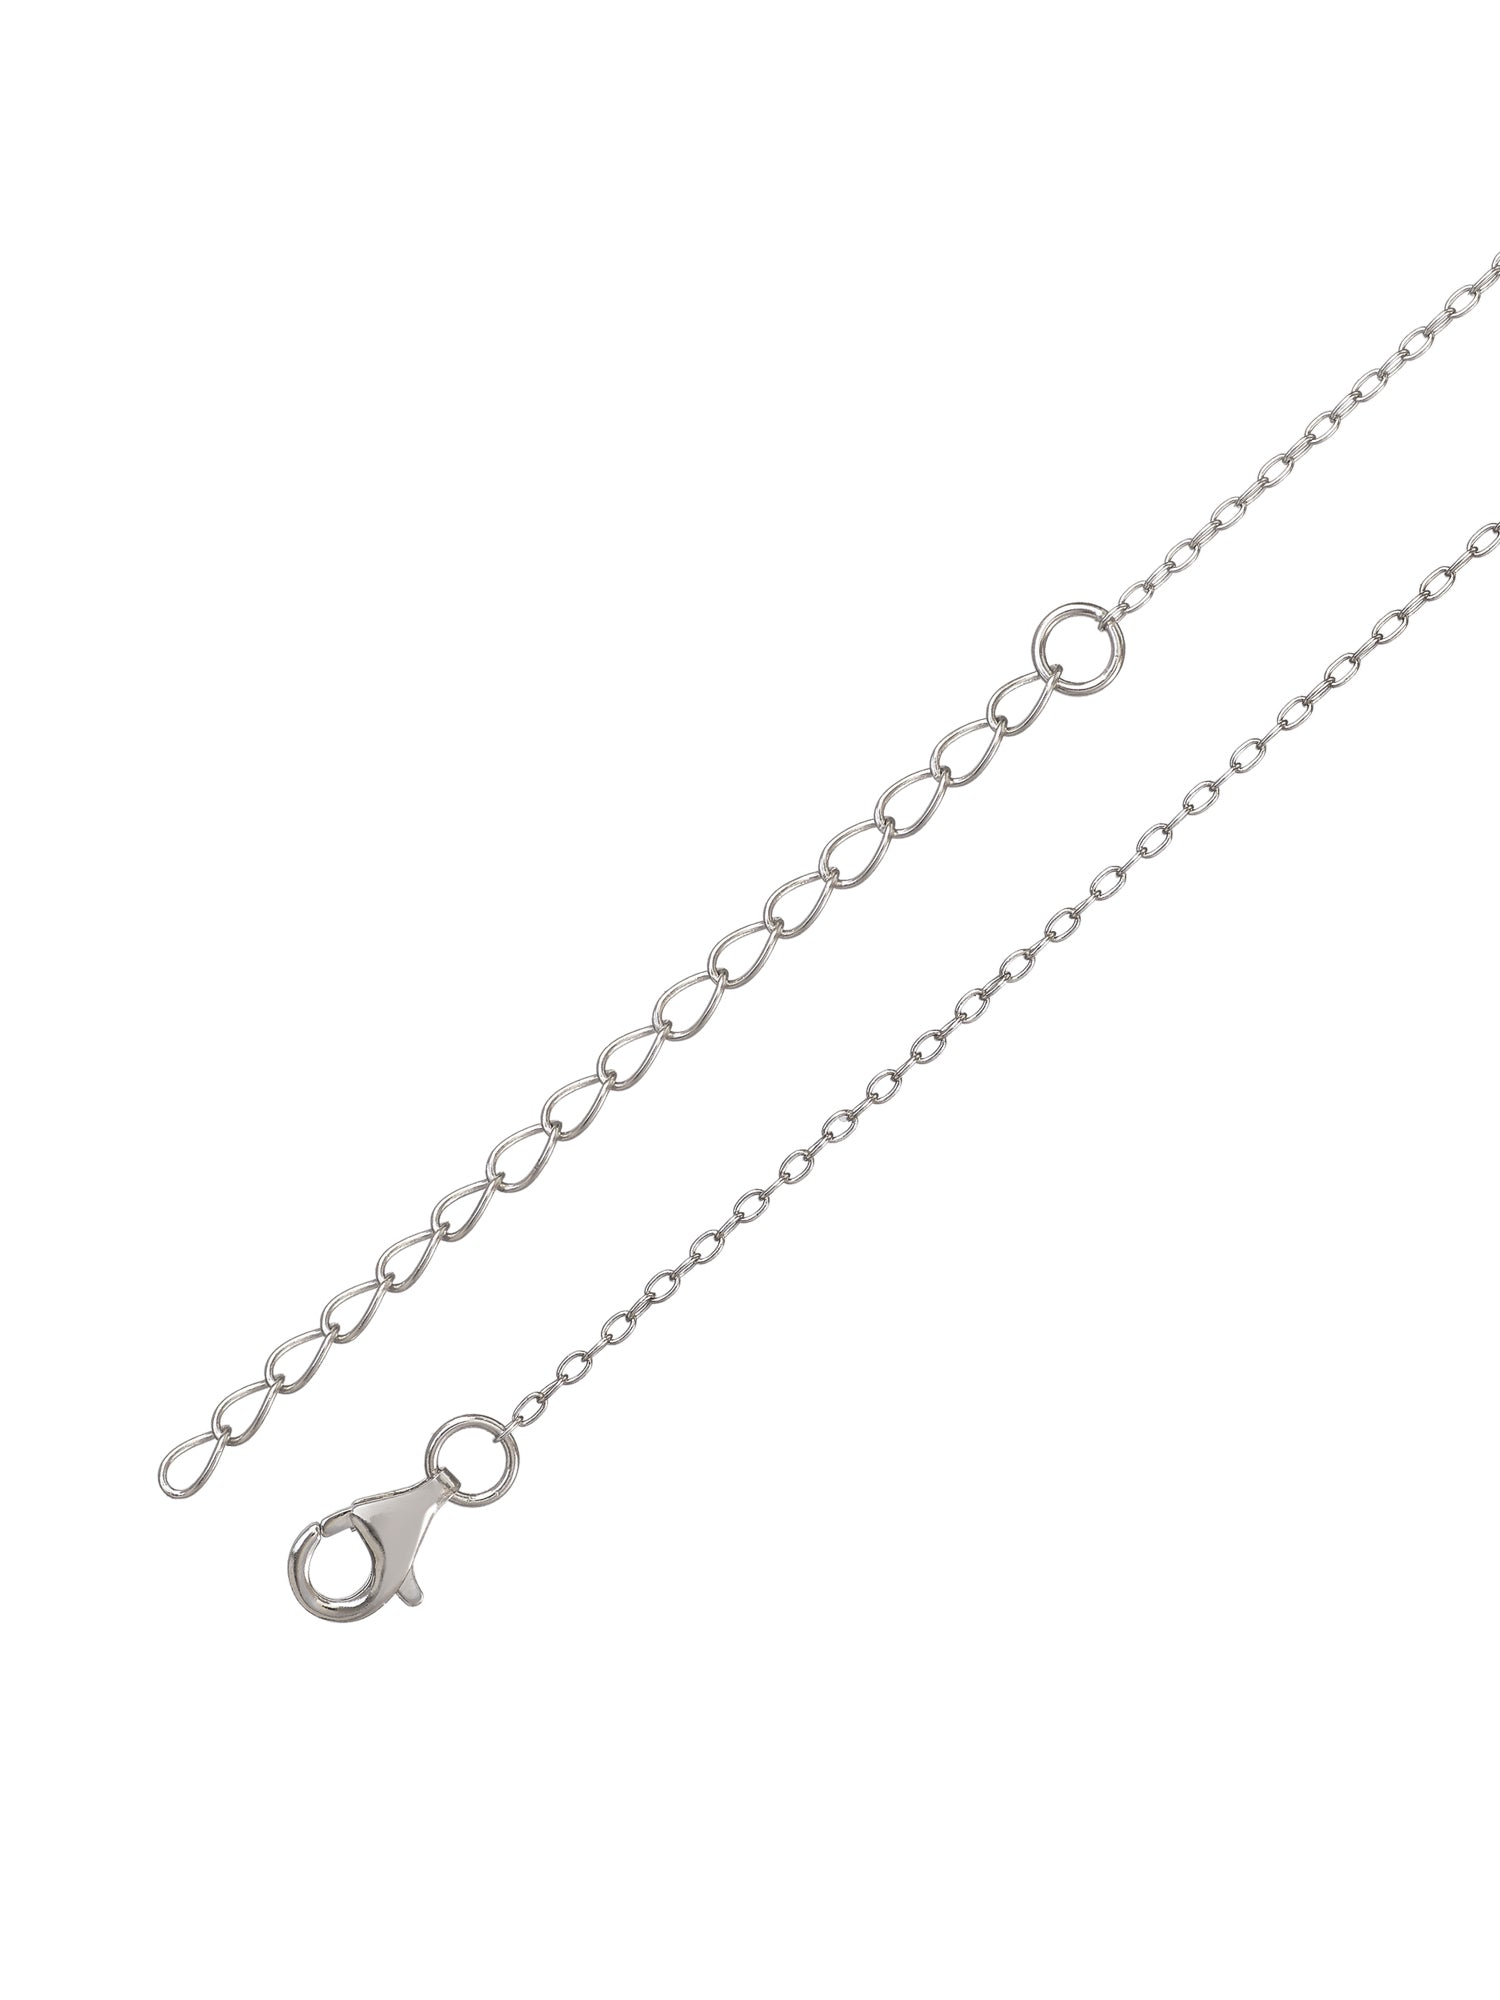 STERLING SILVER BLUE SAPPHIRE HALO NECKLACE WITH CHAIN-4